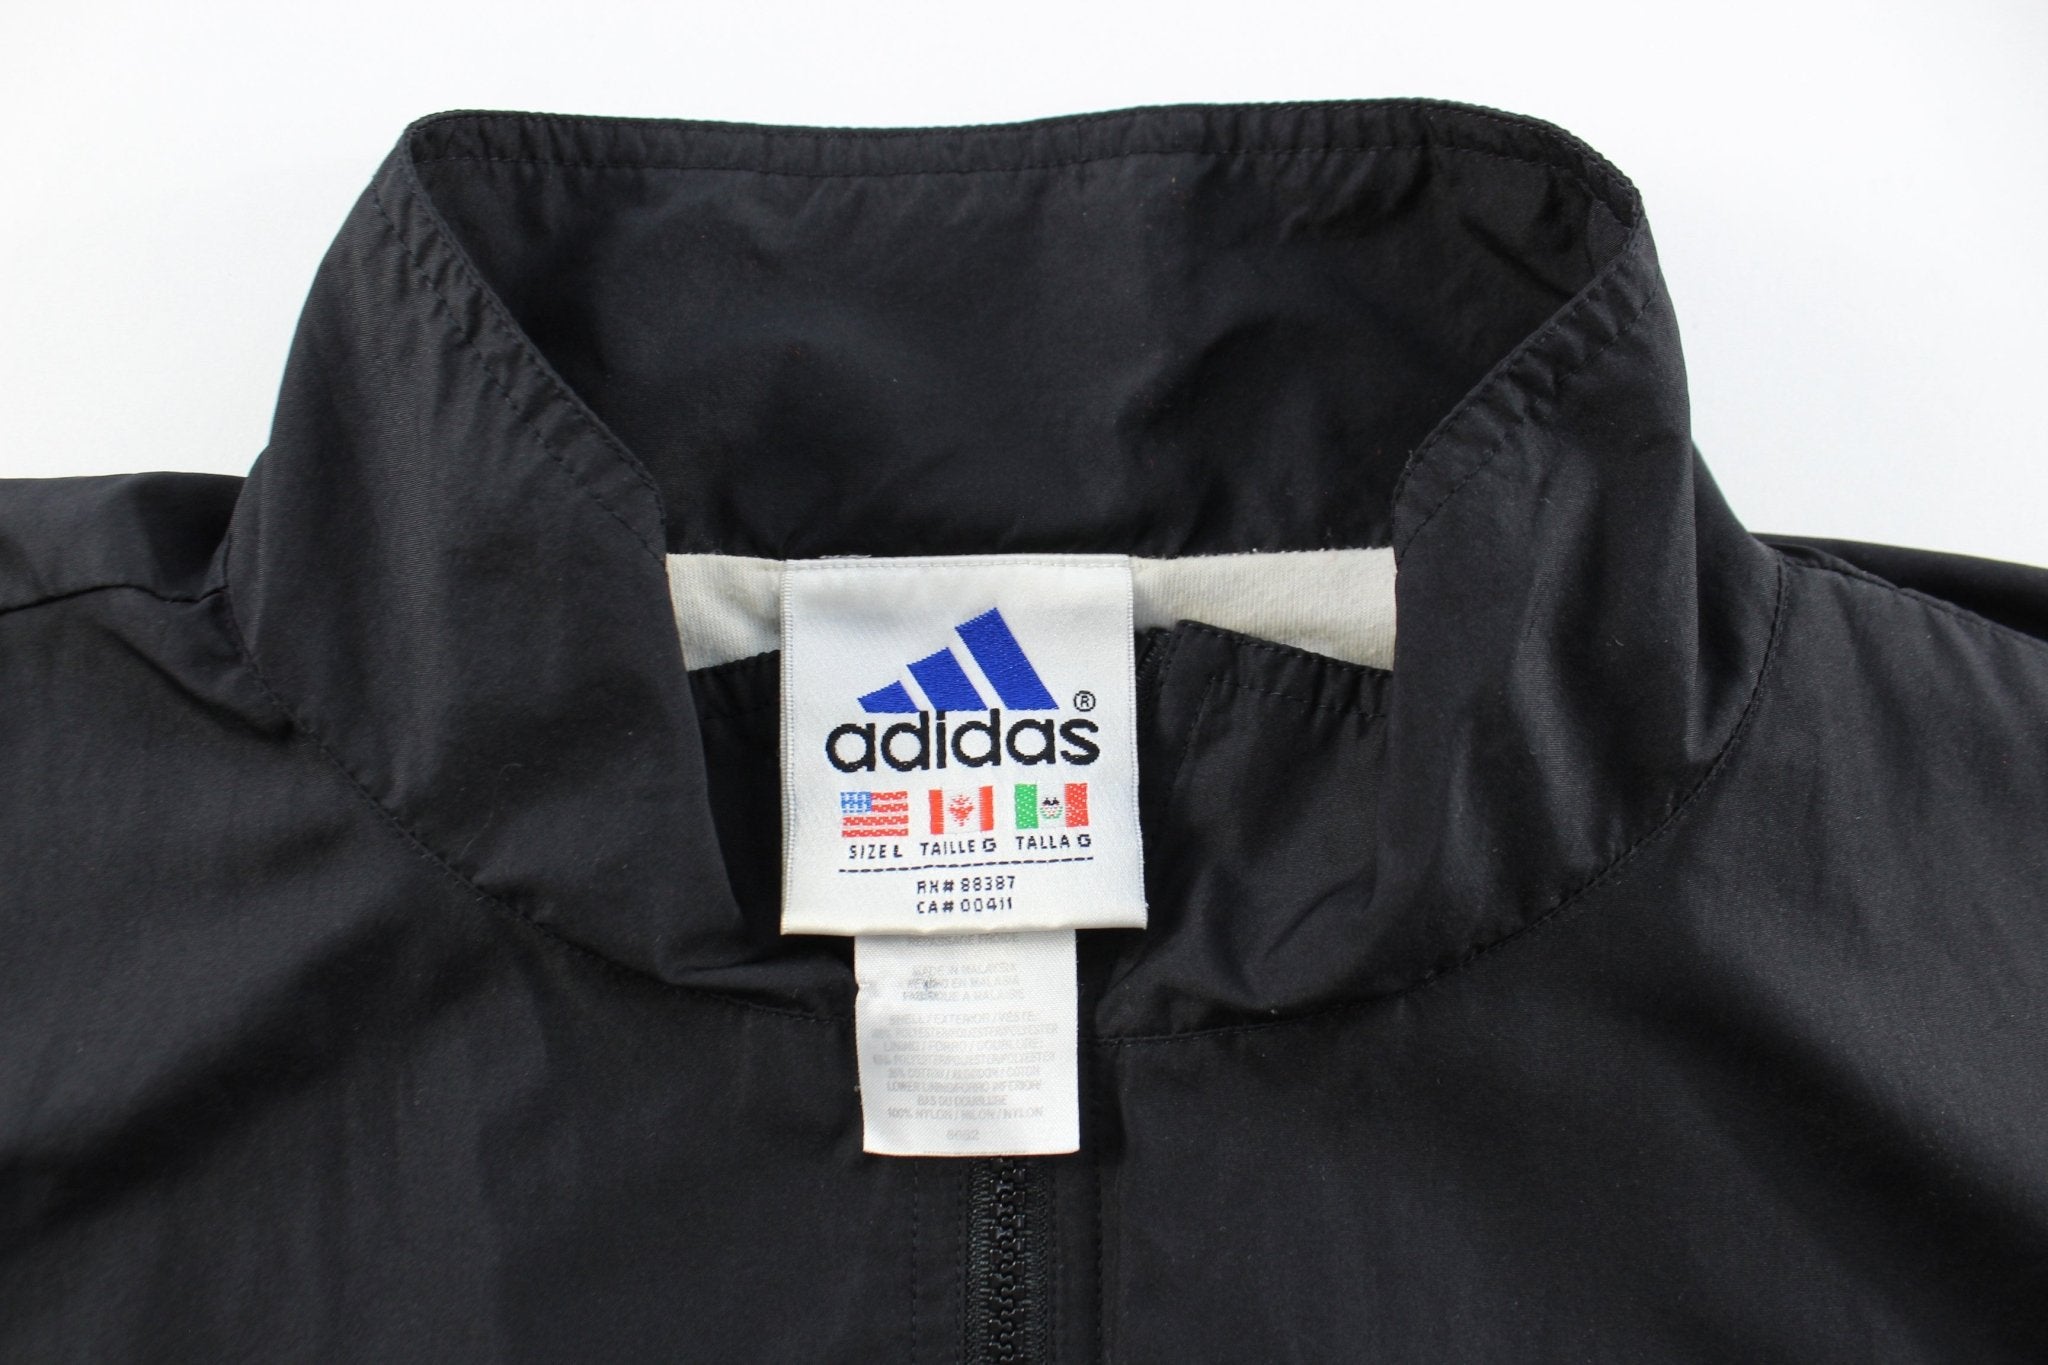 90's Adidas Embroidered Logo Black, White, & Green Zip Up Jacket - ThriftedThreads.com